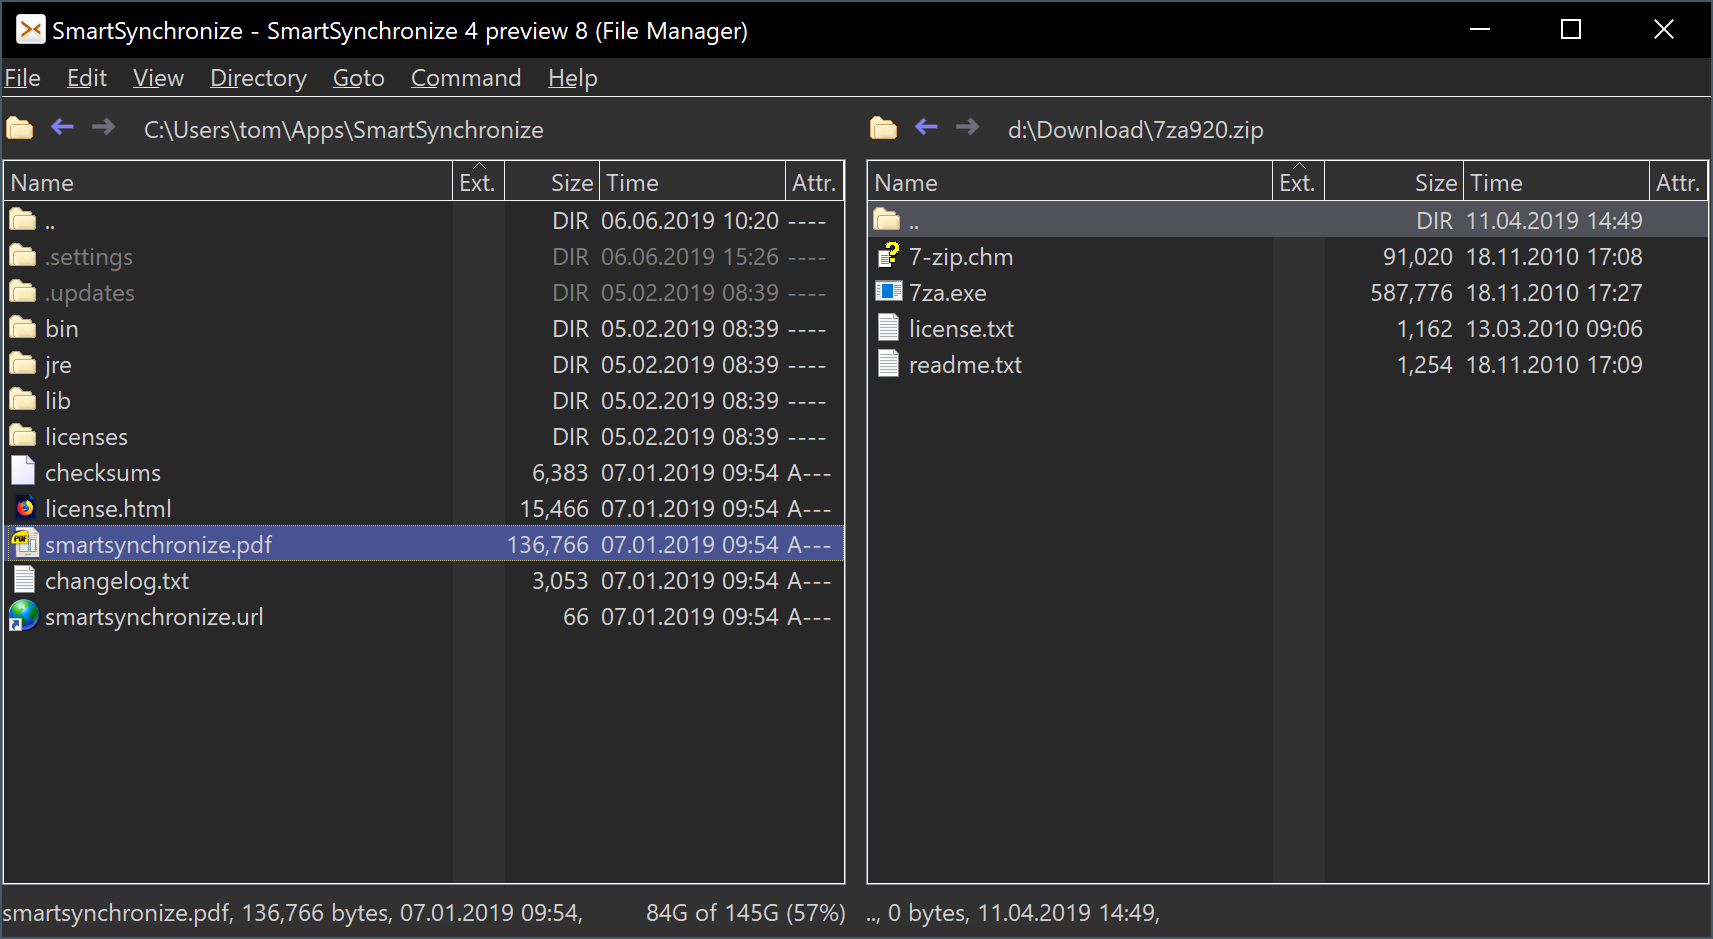 Built-in dual-pane file manager.